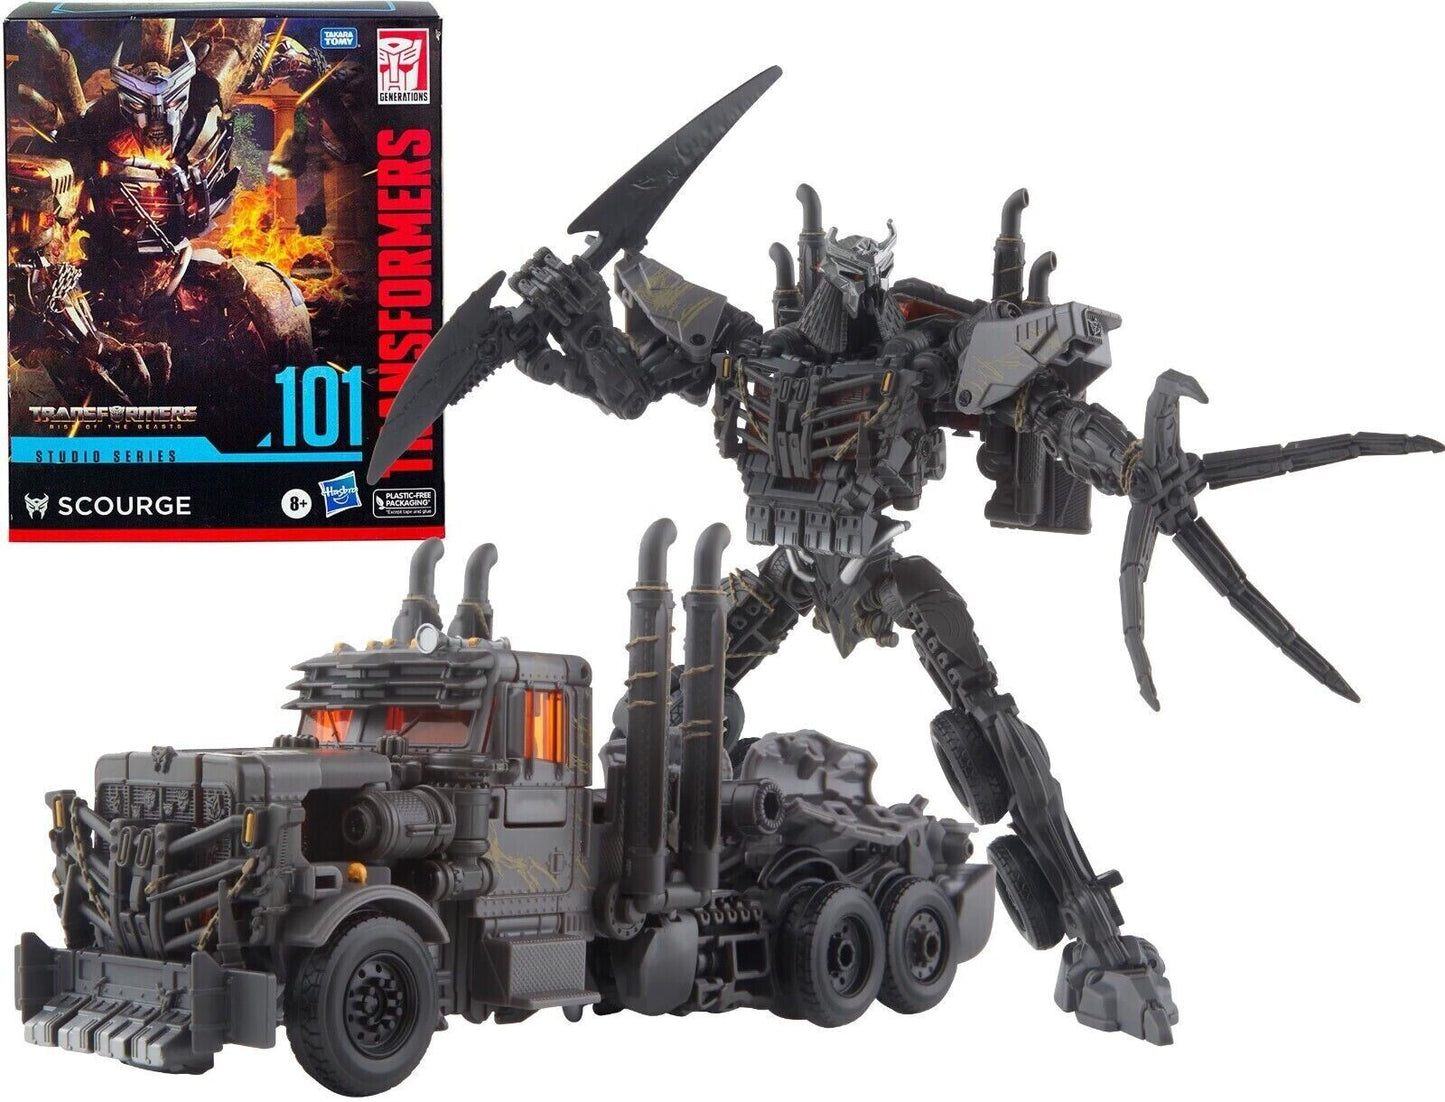 Transformers - Studio Series - Rise of the Beasts: Leader Scourge (101)